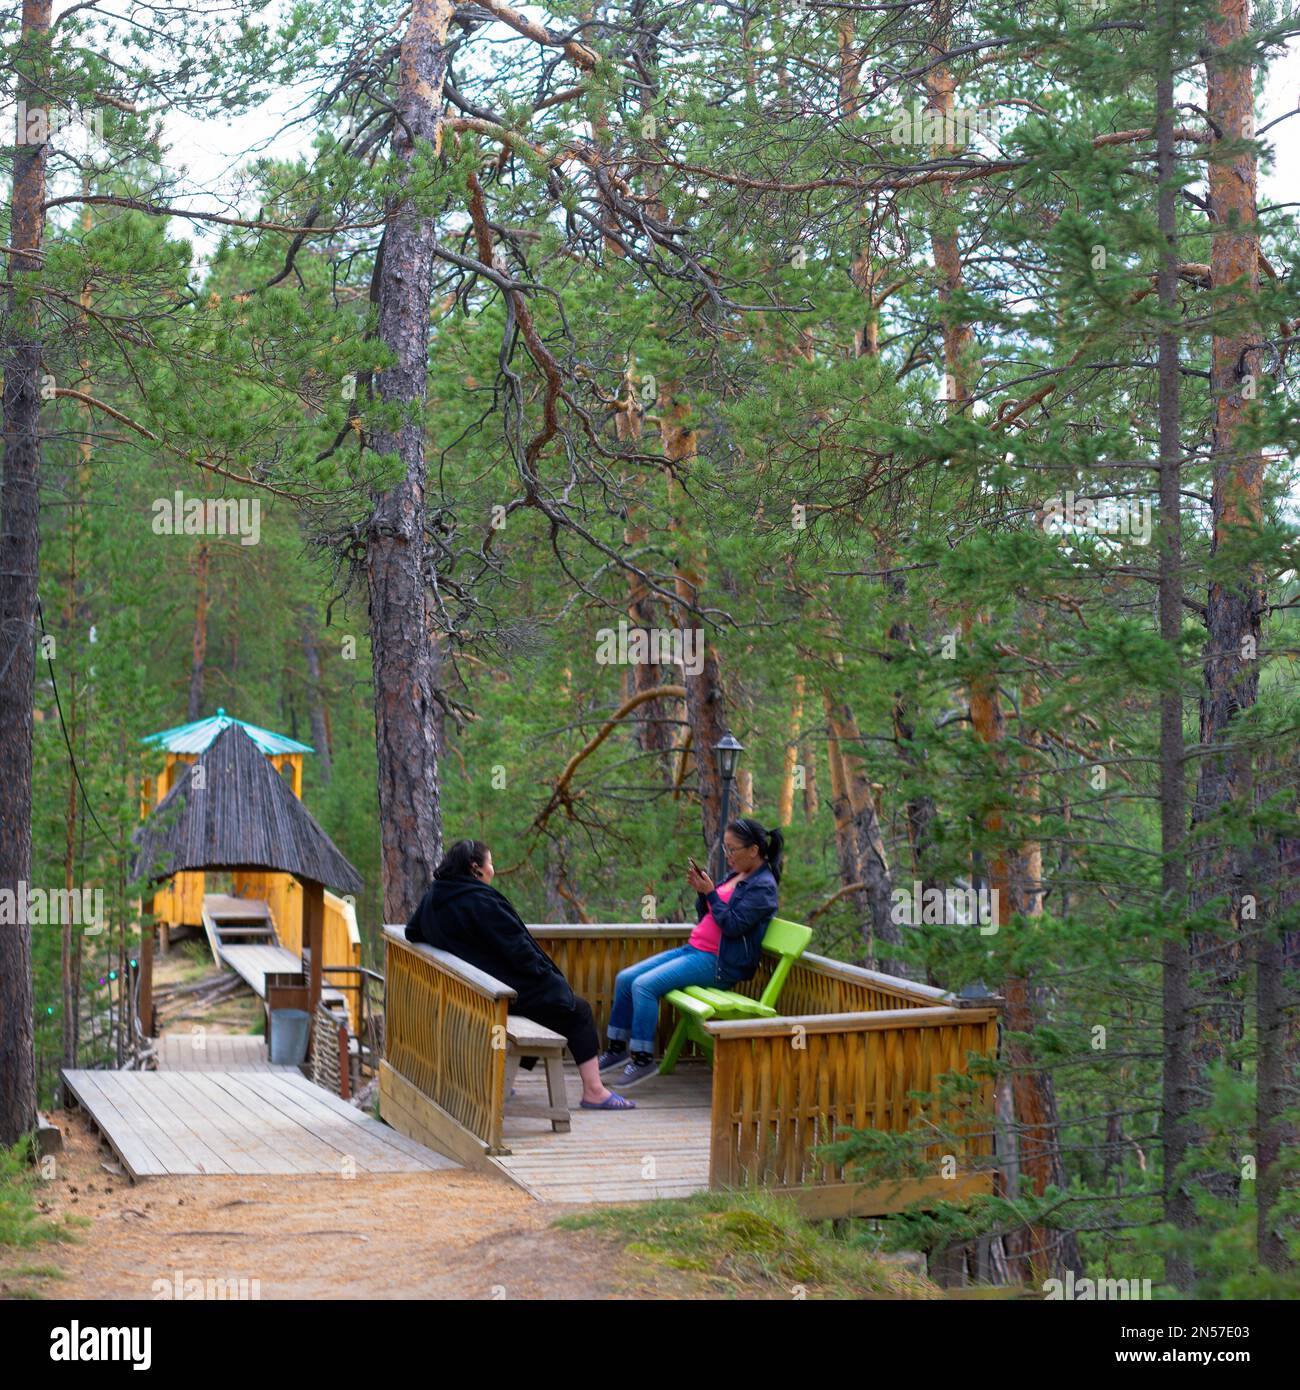 Two Yakut girls are resting on a bench in the forest in the Park playing phone in the Northern taiga. Stock Photo